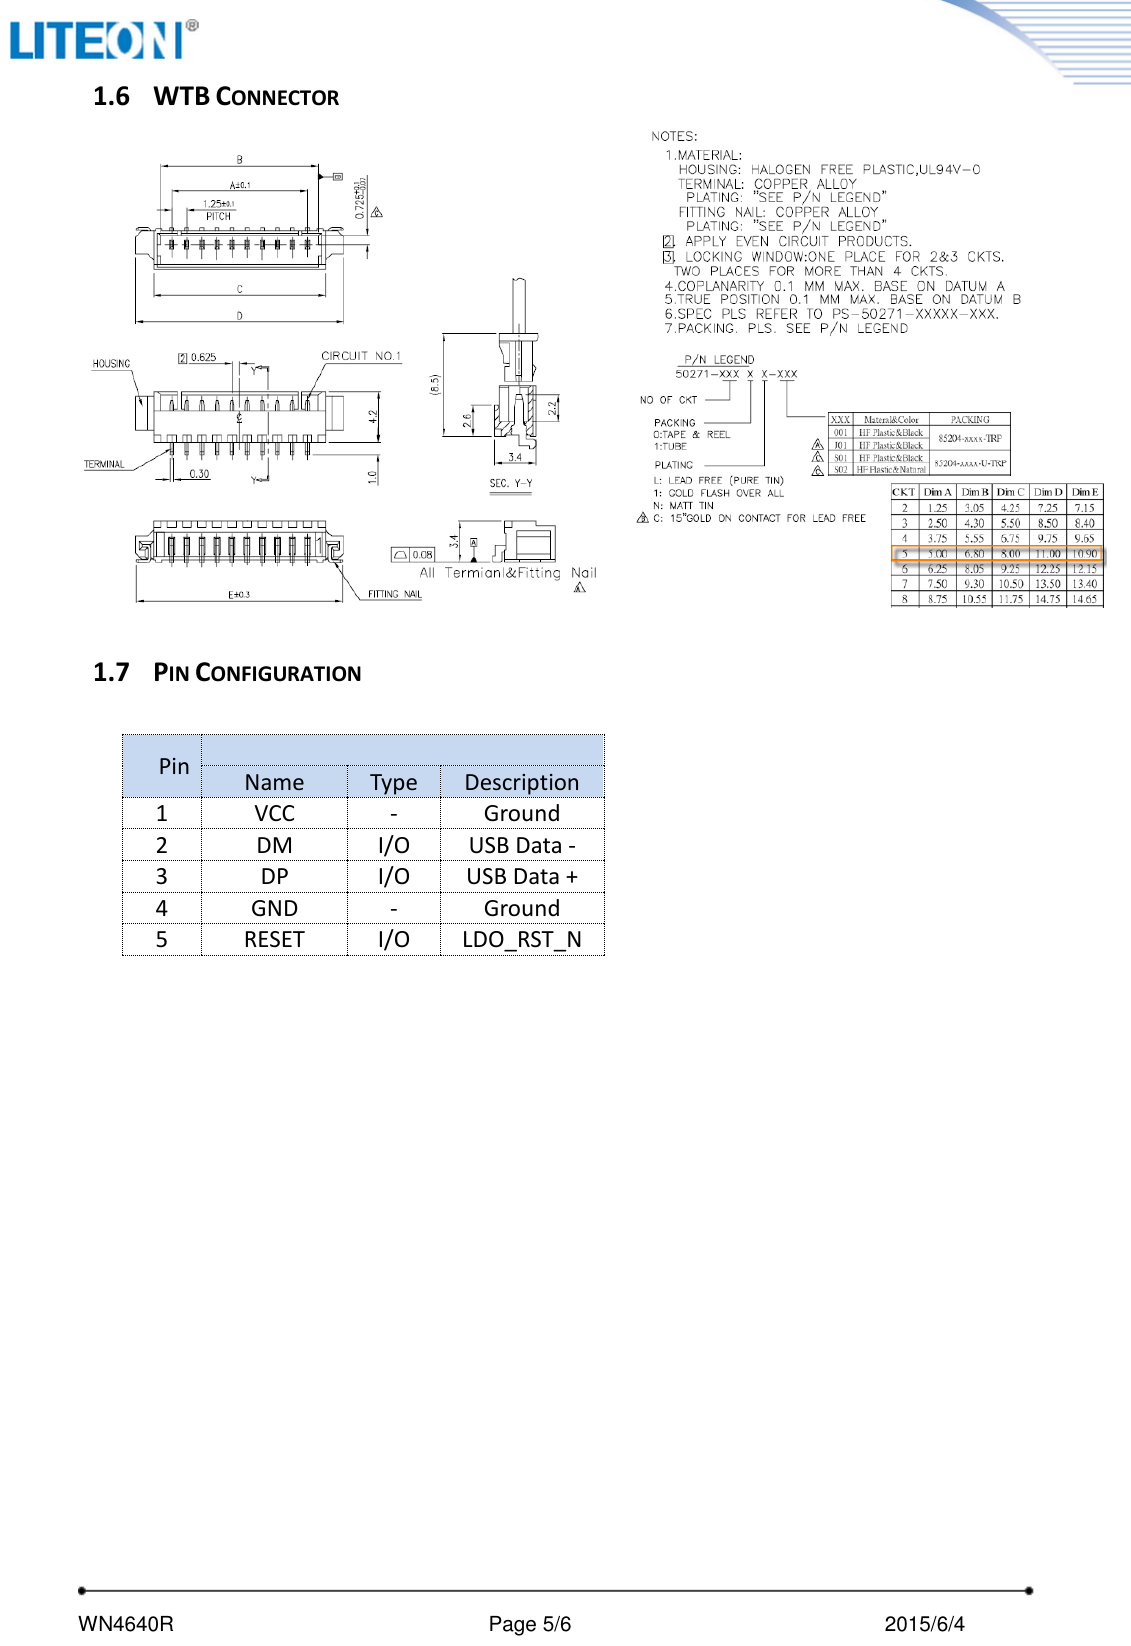     WN4640R                                                       Page 5/6                                               2015/6/4   1.6 WTB CONNECTOR   1.7 PIN CONFIGURATION    Pin  Name Type Description 1 VCC - Ground 2 DM I/O USB Data - 3 DP I/O USB Data + 4 GND - Ground 5 RESET I/O LDO_RST_N 